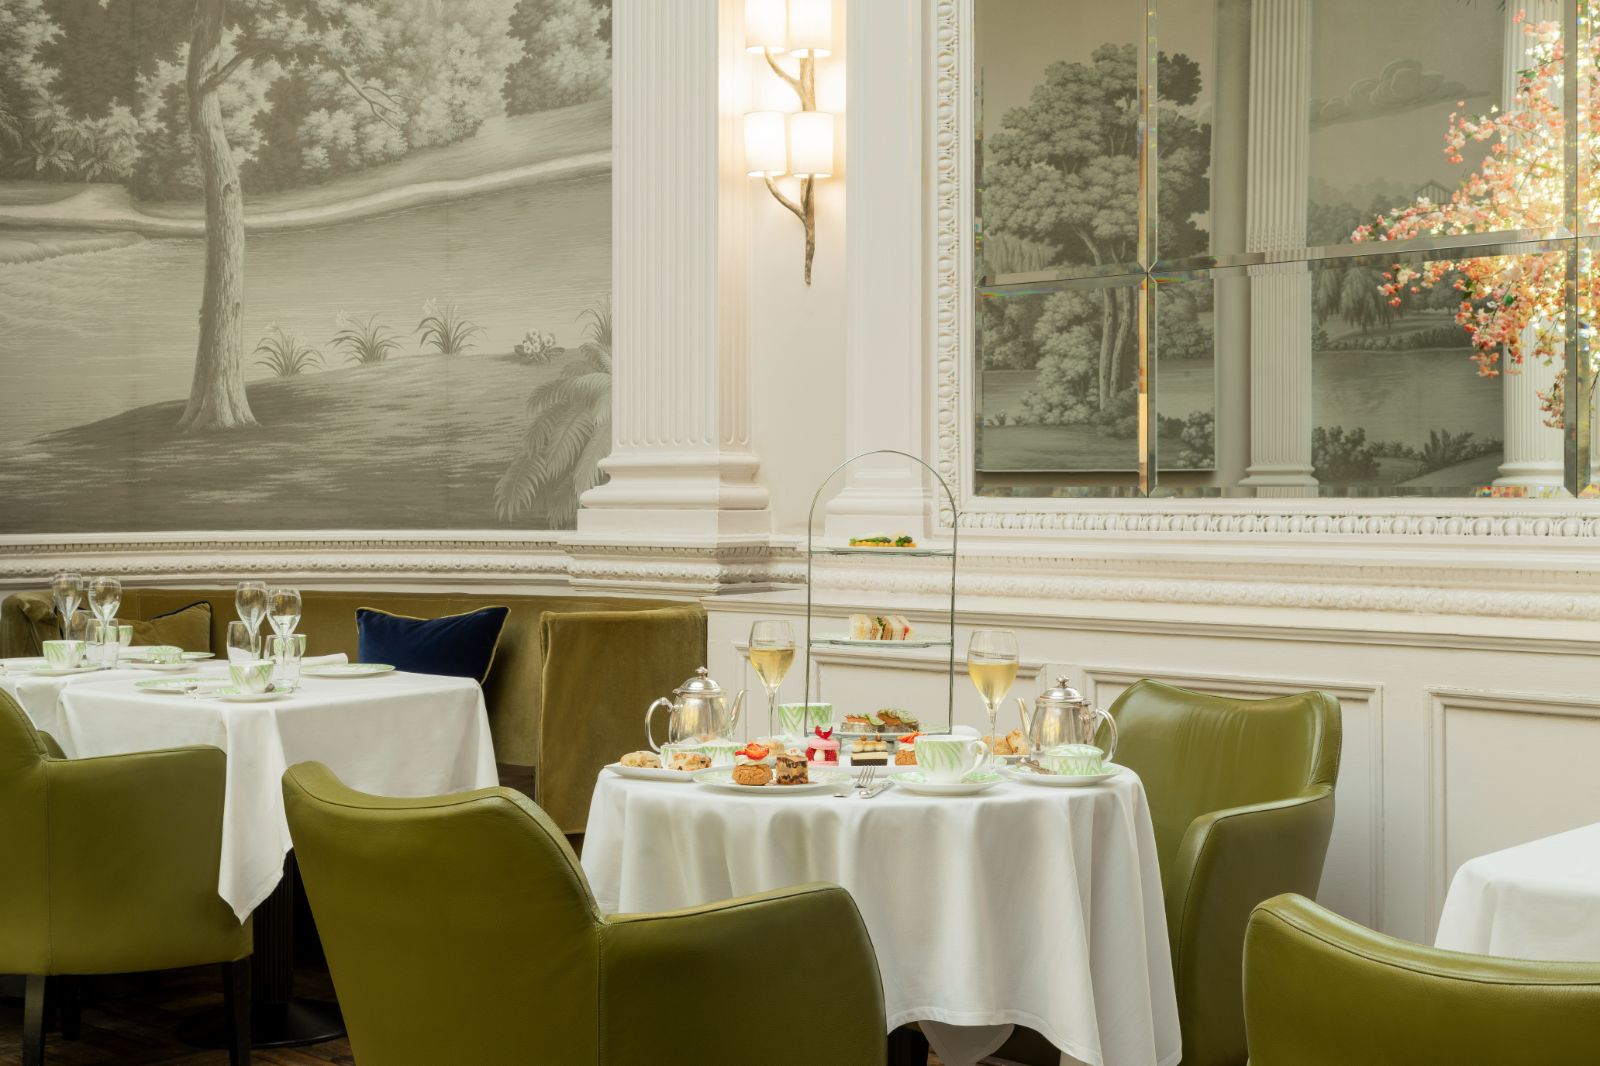 Afternoon tea served at The Balmoral in Edinburgh